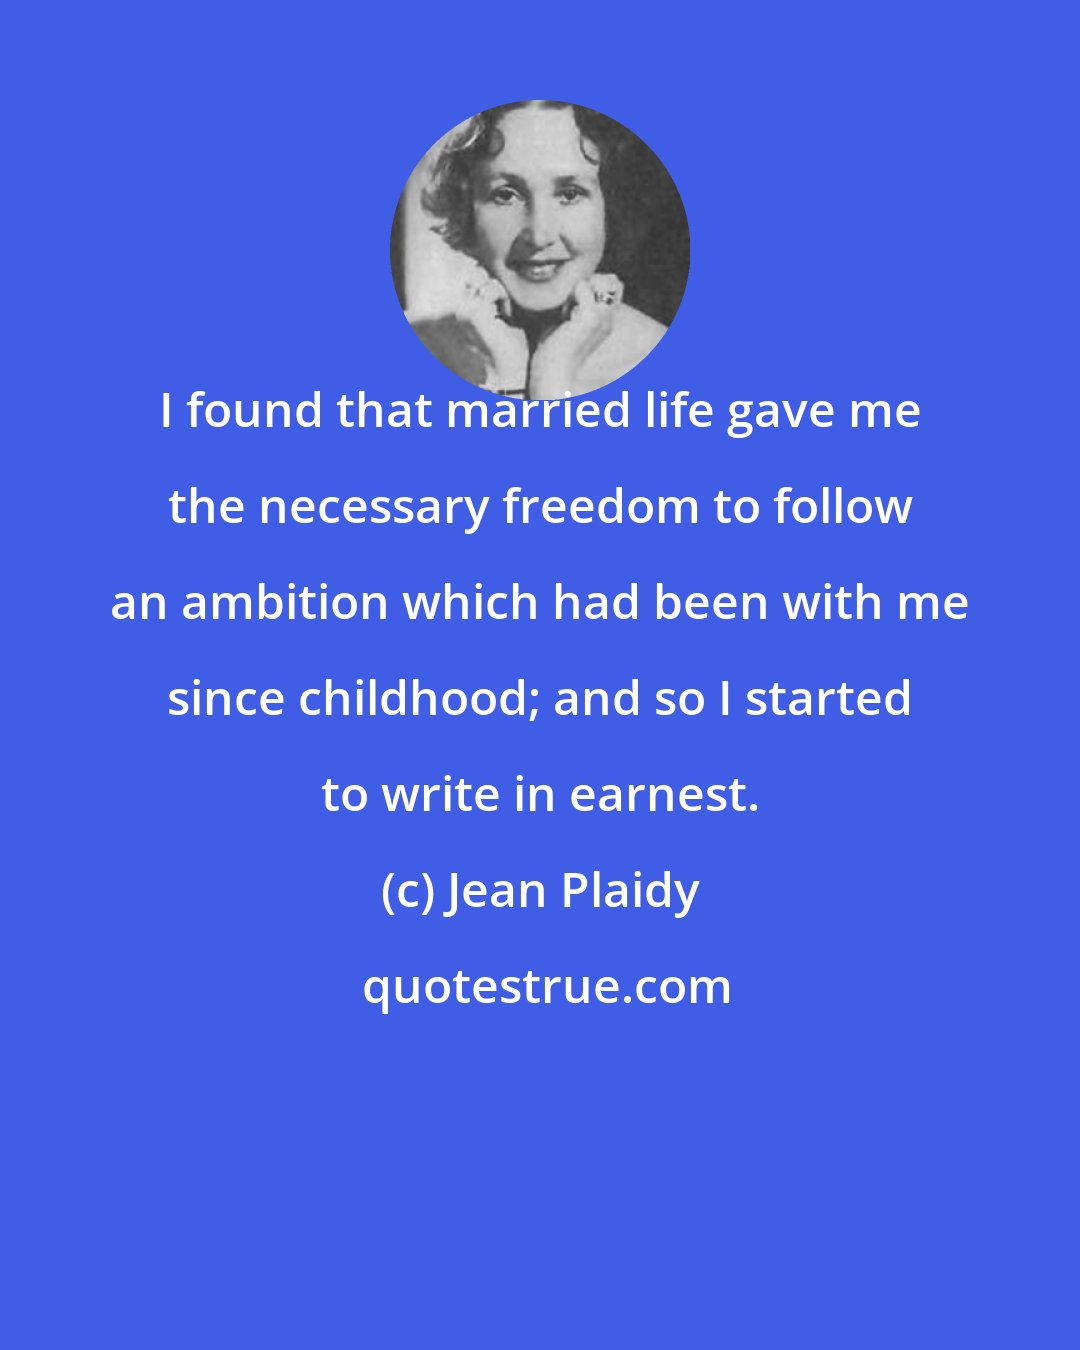 Jean Plaidy: I found that married life gave me the necessary freedom to follow an ambition which had been with me since childhood; and so I started to write in earnest.